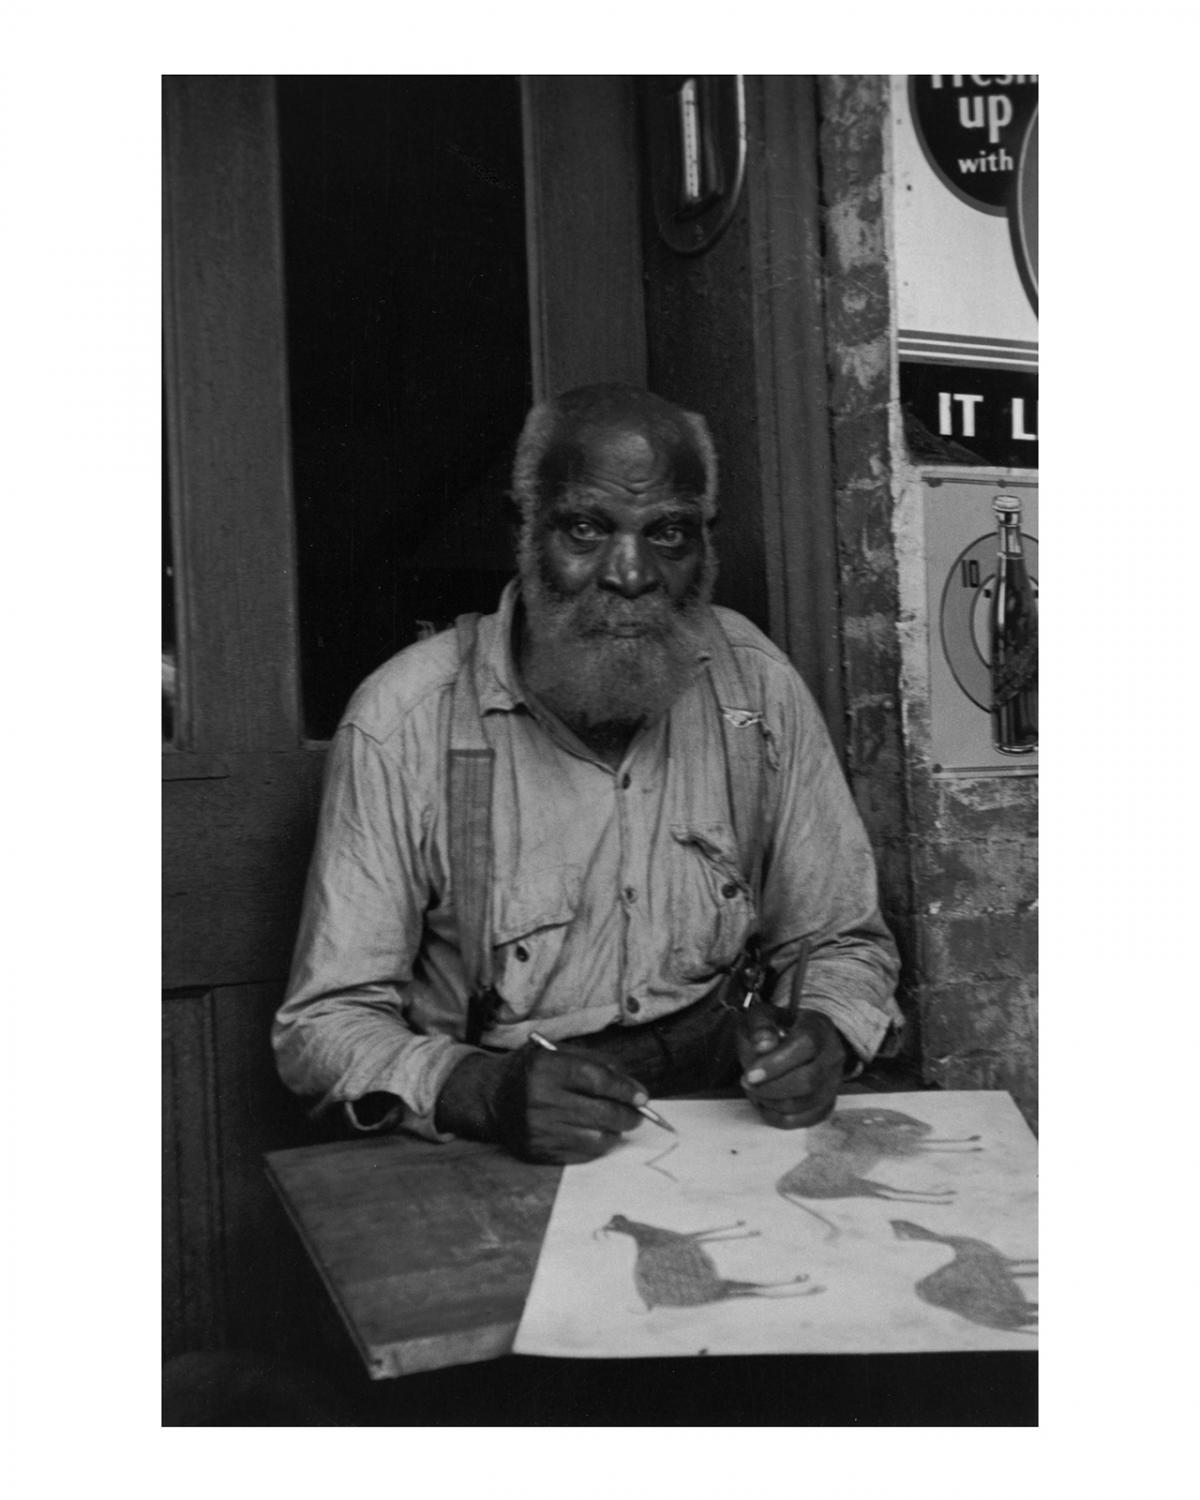 This is an image of artist Bill Traylor sitting at a table.